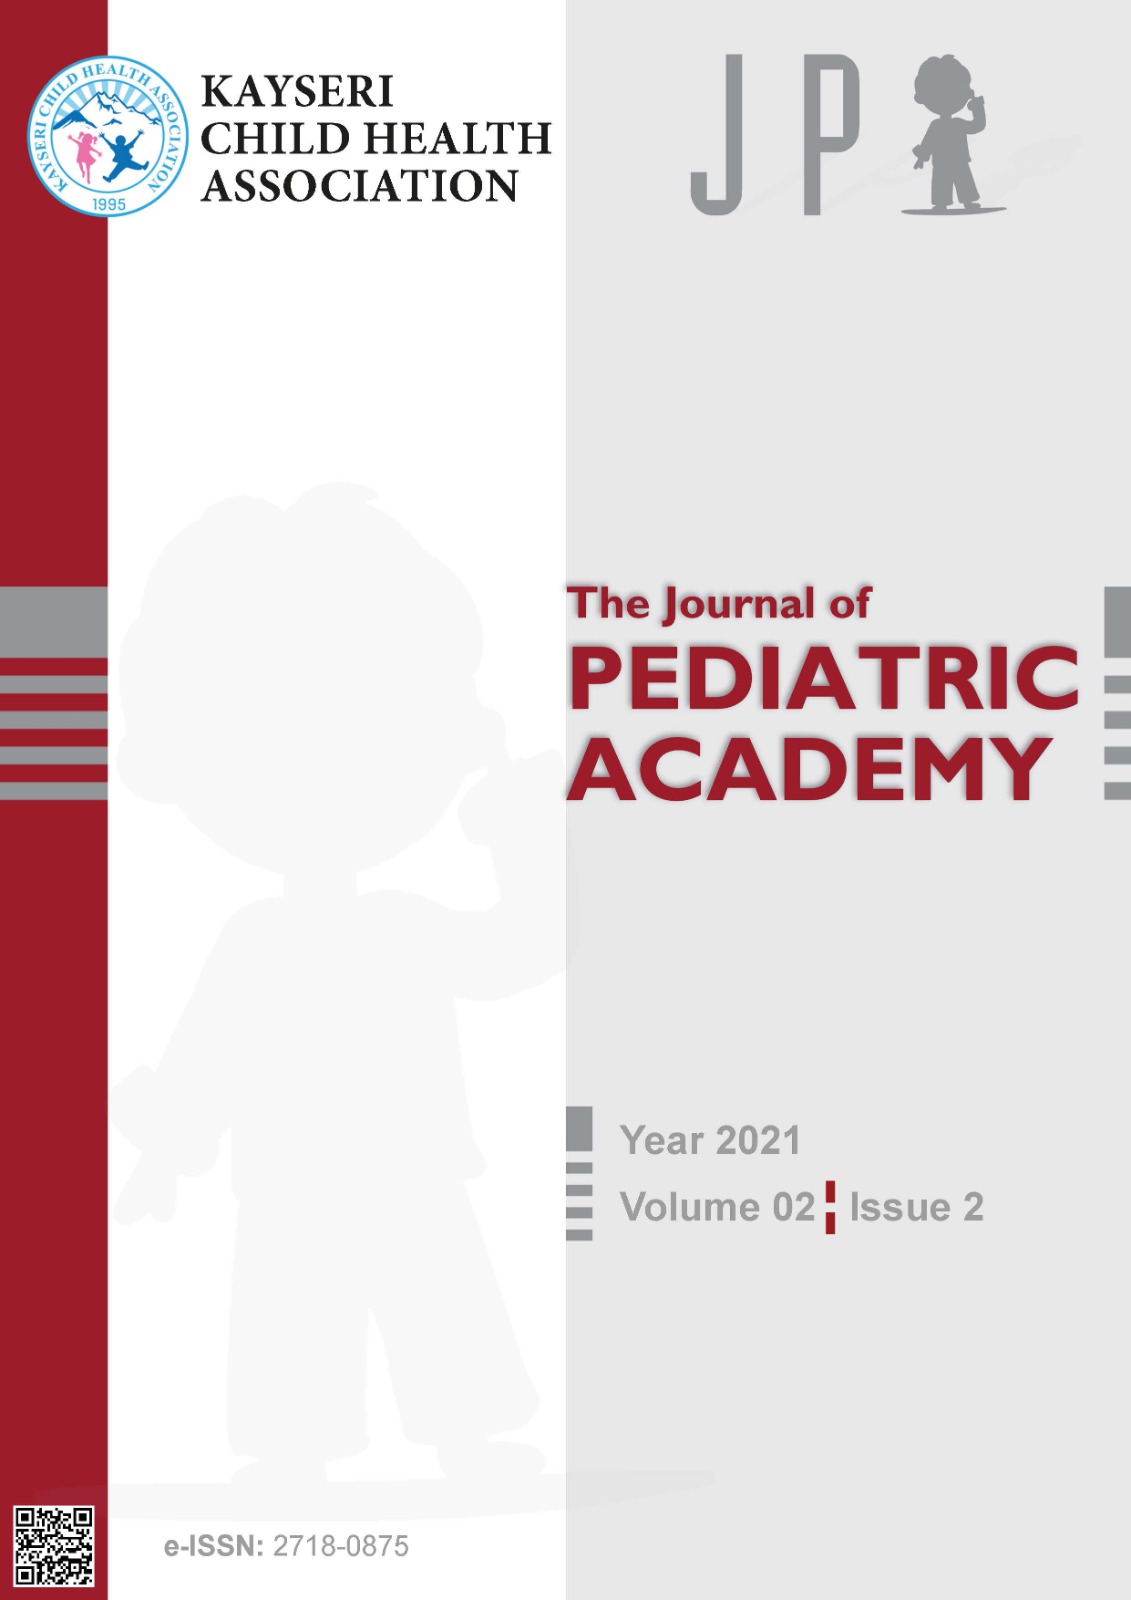 					View Vol. 2 No. 2 (2021): The Journal of Pediatric Academy
				